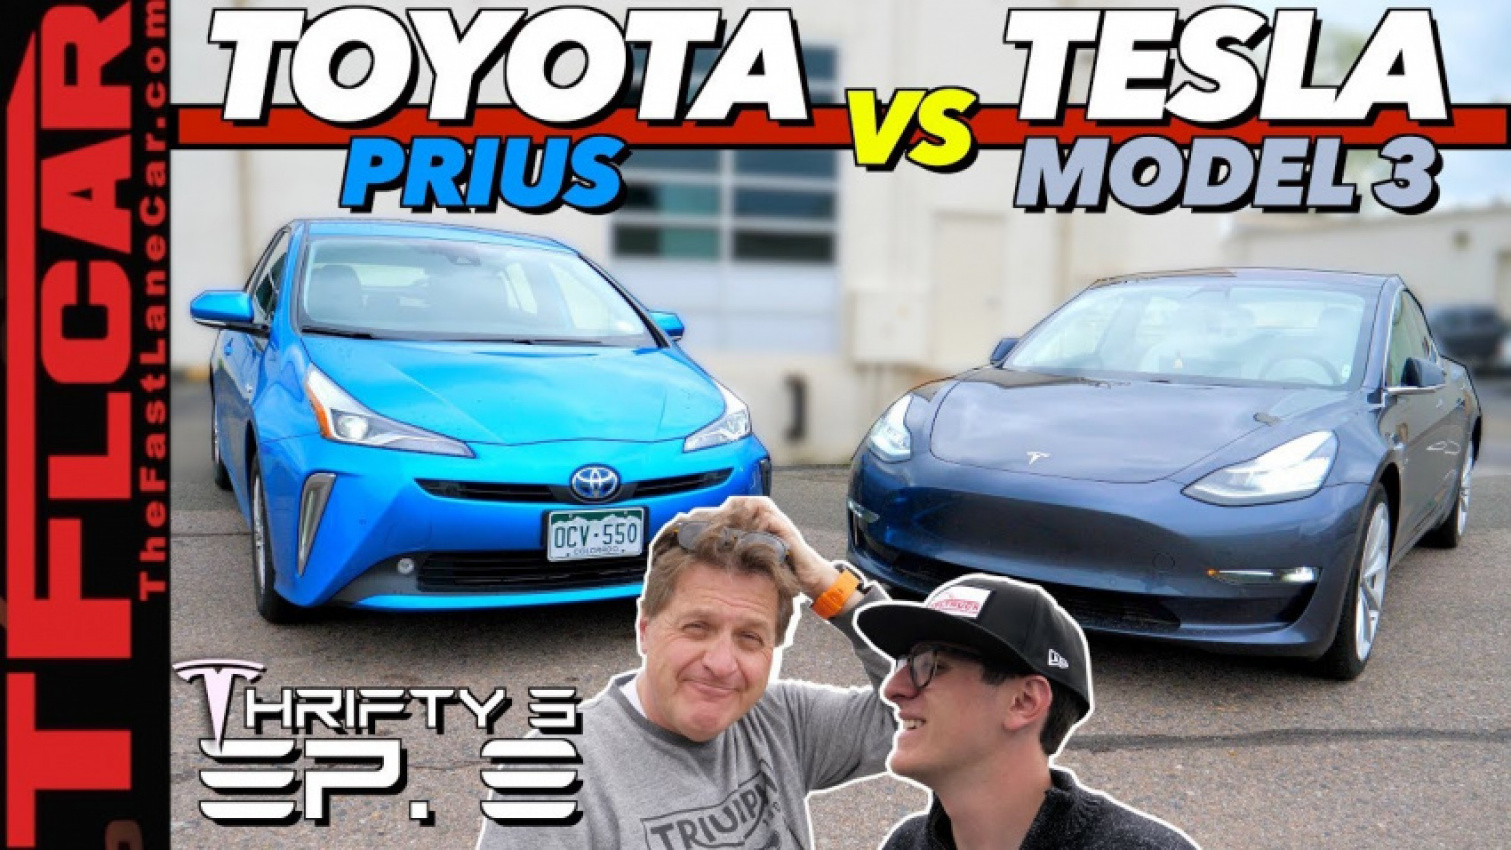 autos, cars, tesla, cost of owning a tesla, cost of tesla model 3, model 3, model 3 vs chevy bolt, model 3 vs toyota prius, model s, prius, tesla model 3, tesla model 3 cost, tesla model 3 cost estimator, tesla model 3 cost of ownership, tesla model 3 price, tesla model 3 review, tesla model 3 vs prius, tesla model 3 vs toyota, tesla model 3 vs toyota prius, tesla model s, tesla model x, tesla vs prius, tflcar, the fast lane car, toyota, toyota prius, the answer is surprising! ev vs hybrid: what's the most fuel efficient awd car? – thrifty 3 ep.eight